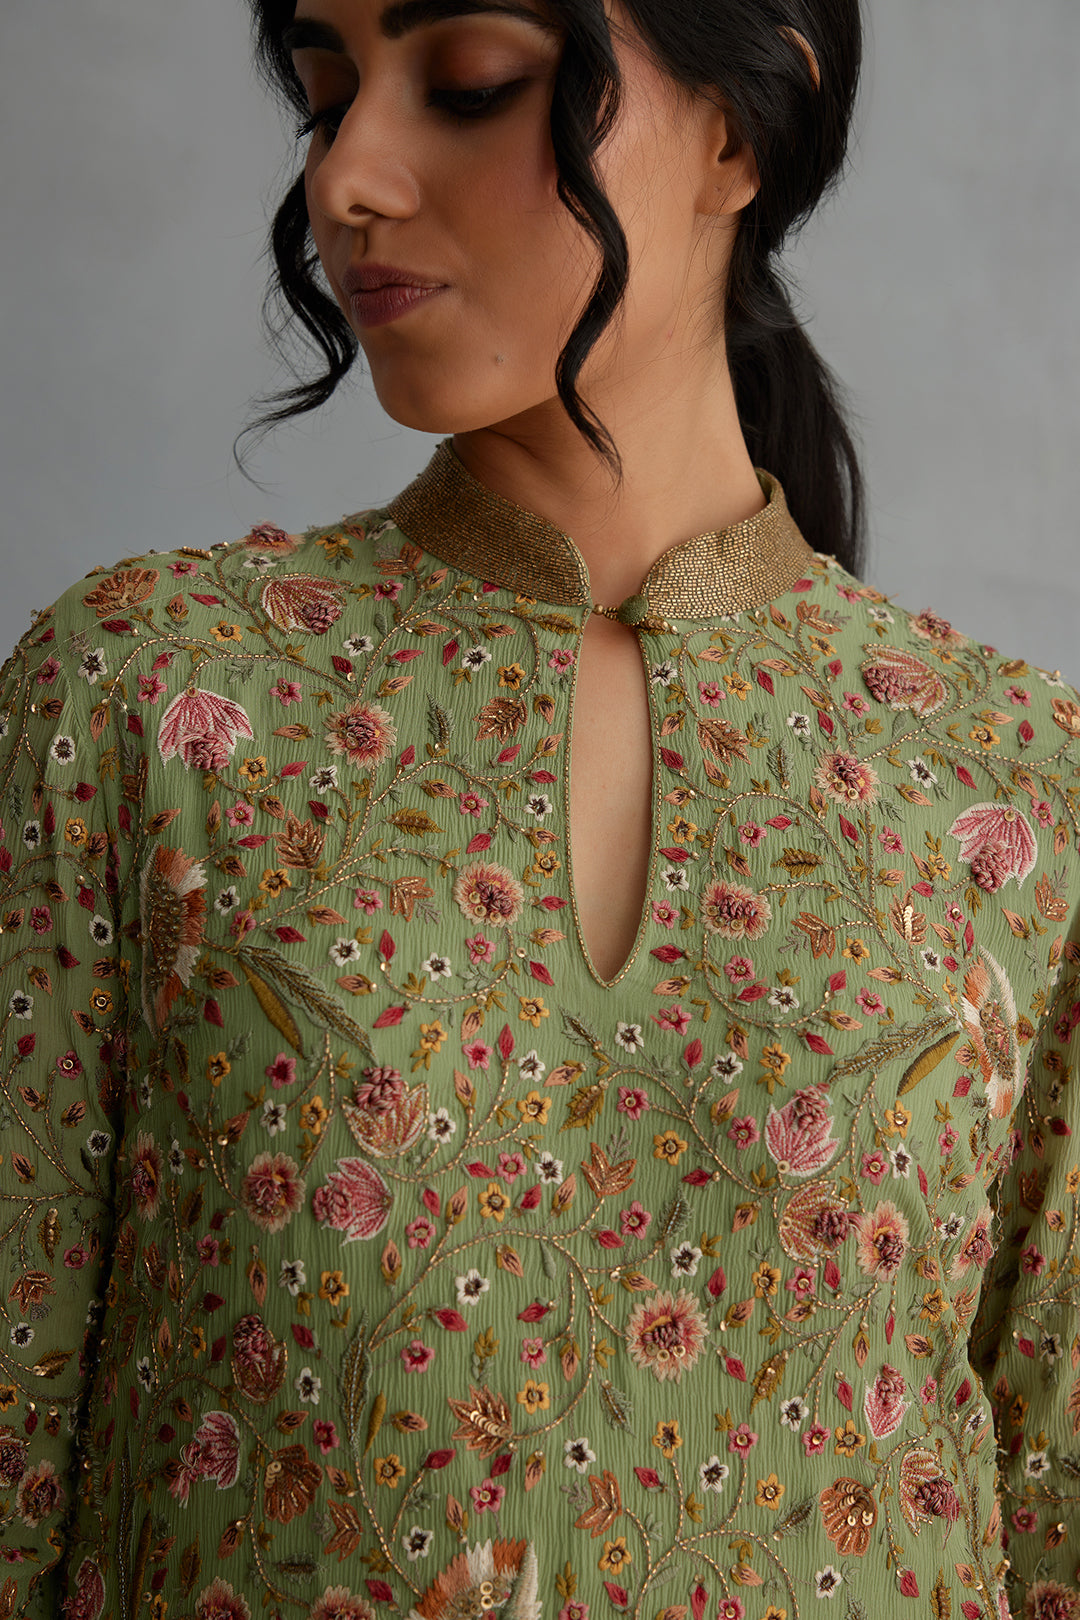 Gharara Set in Intricate Floral  Embroidery